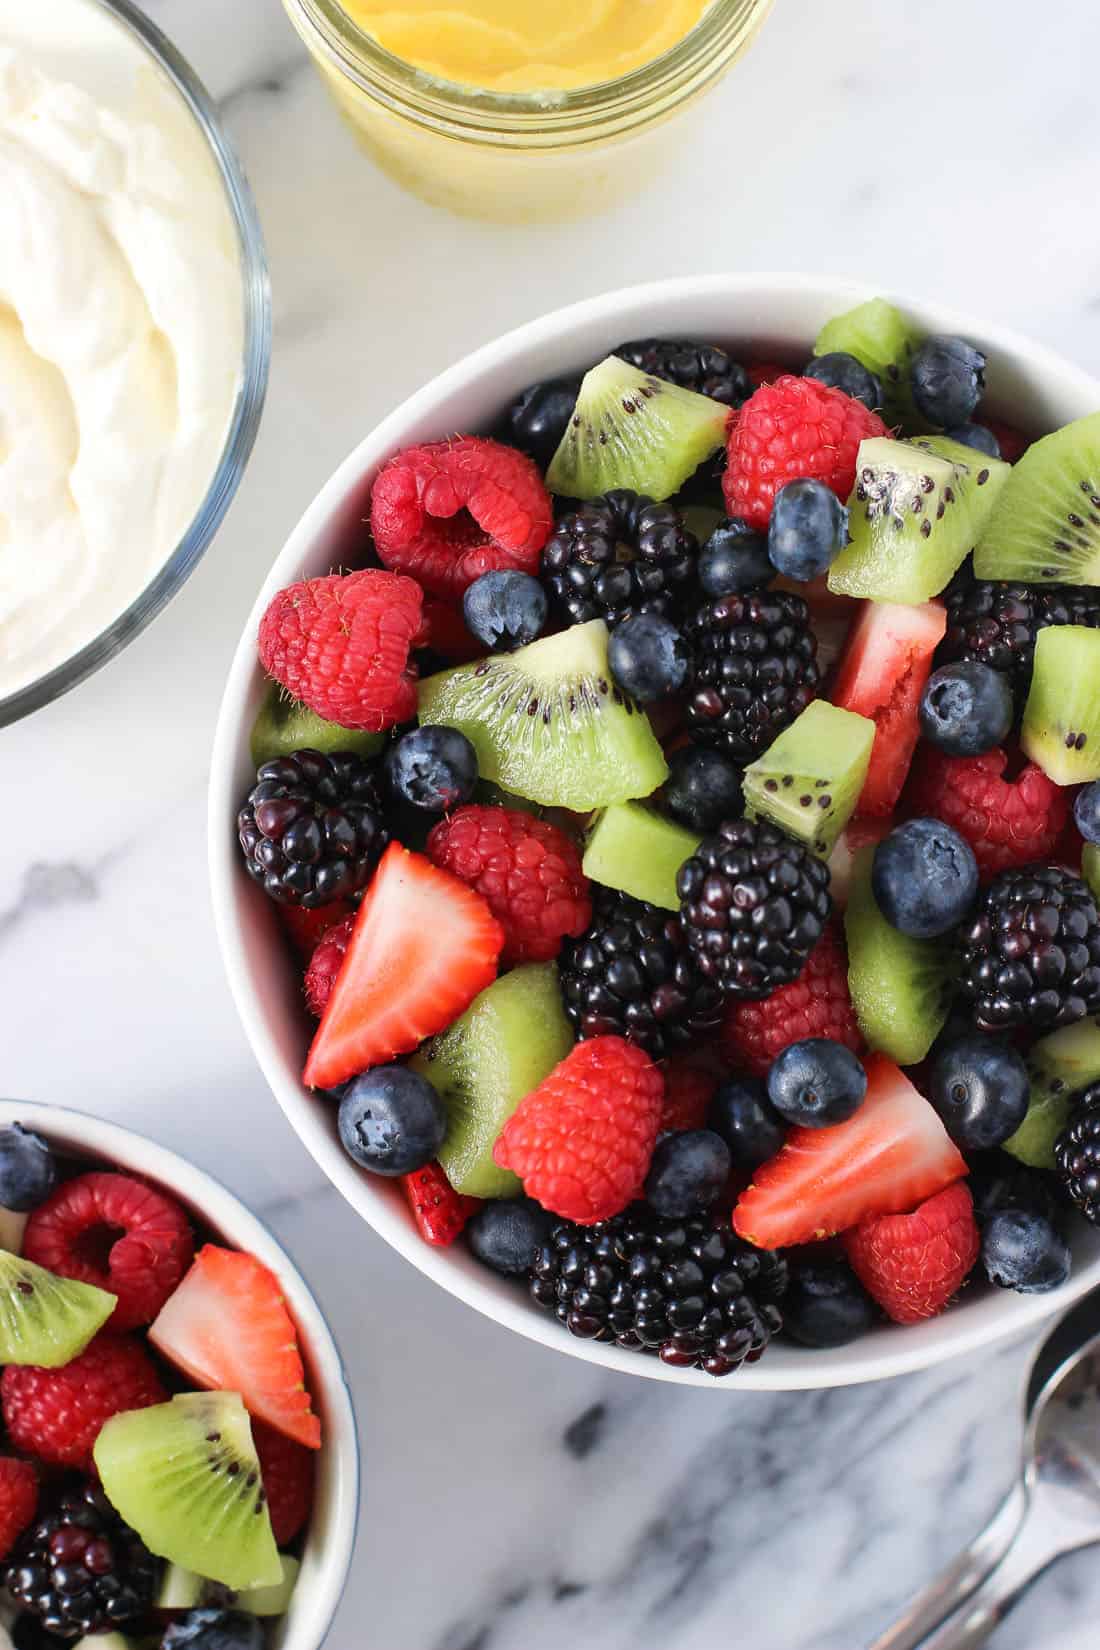 Bowls of fruit salad next to a bowl of whipped cream.